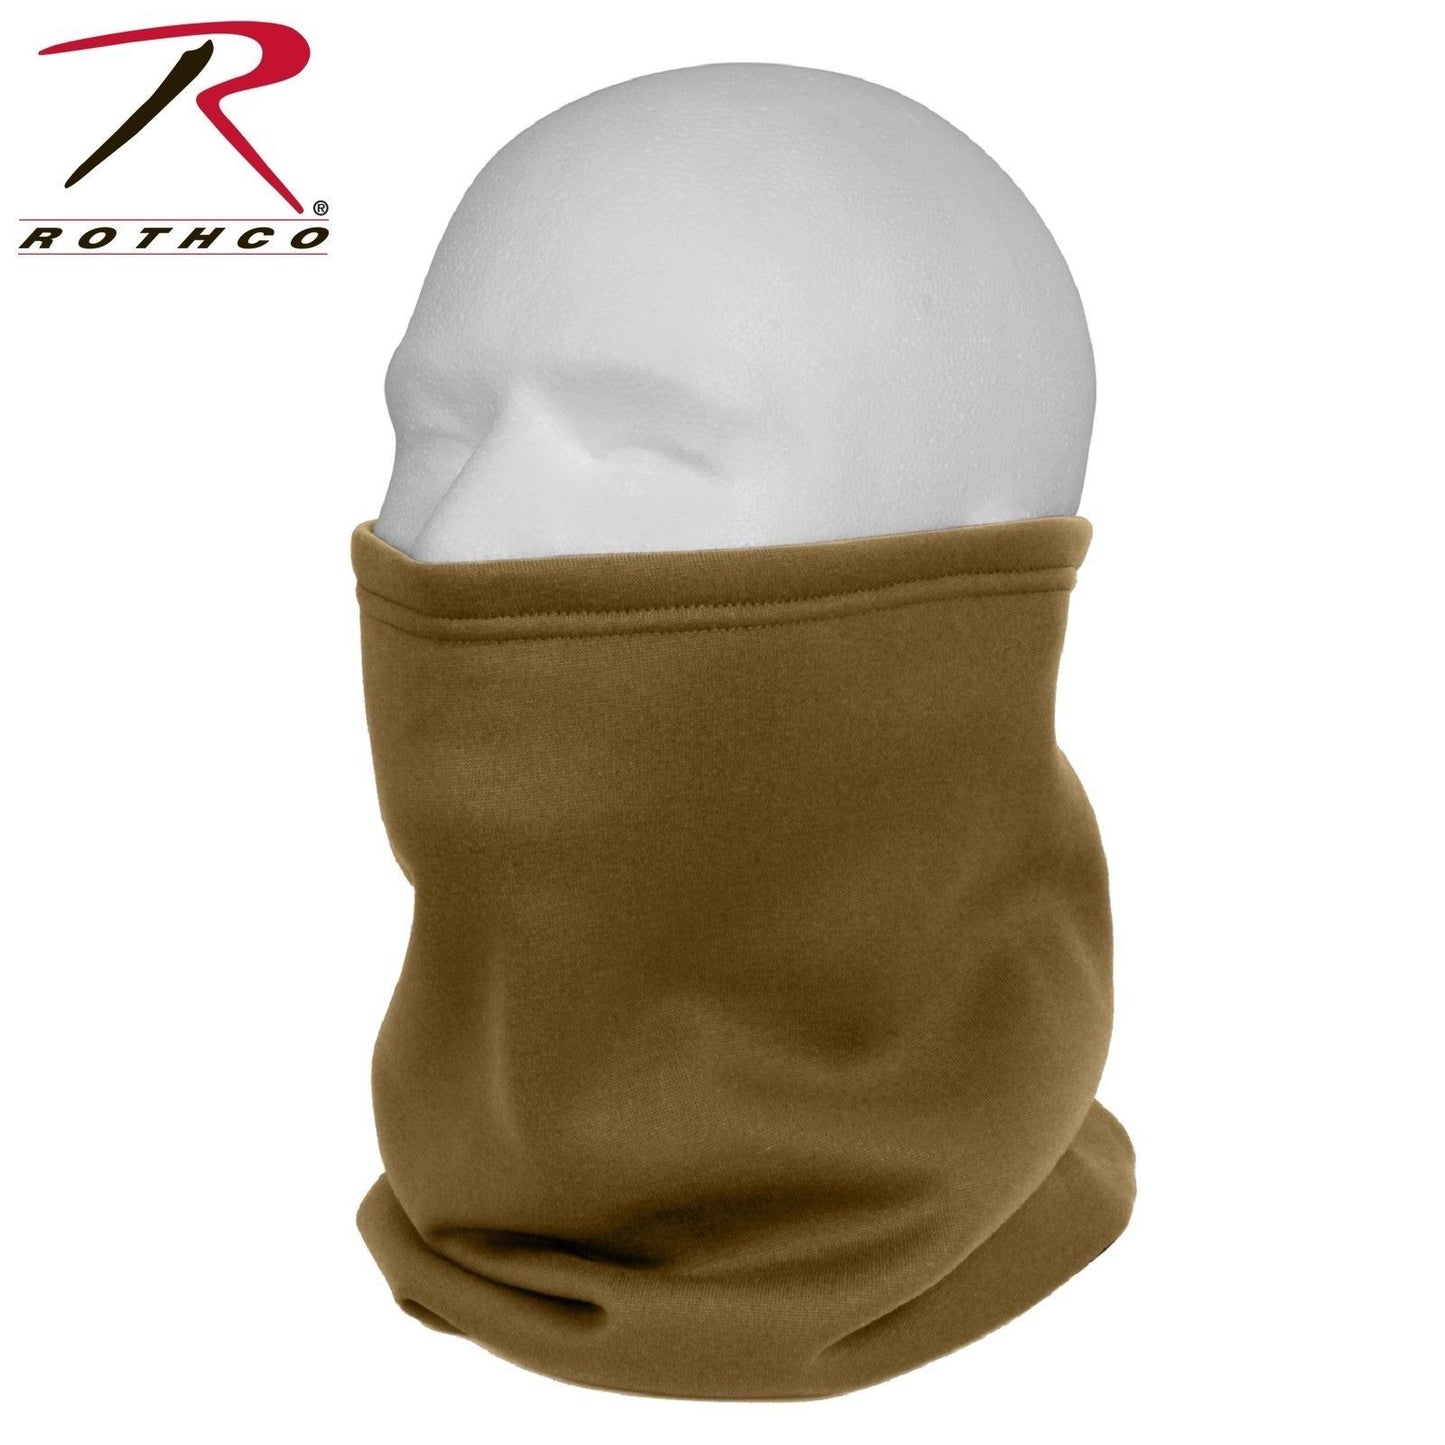 Rothco ECWCS Polyester Neck Gaiters - AR 670-1 Coyote Brown Half Face/Neck Mask